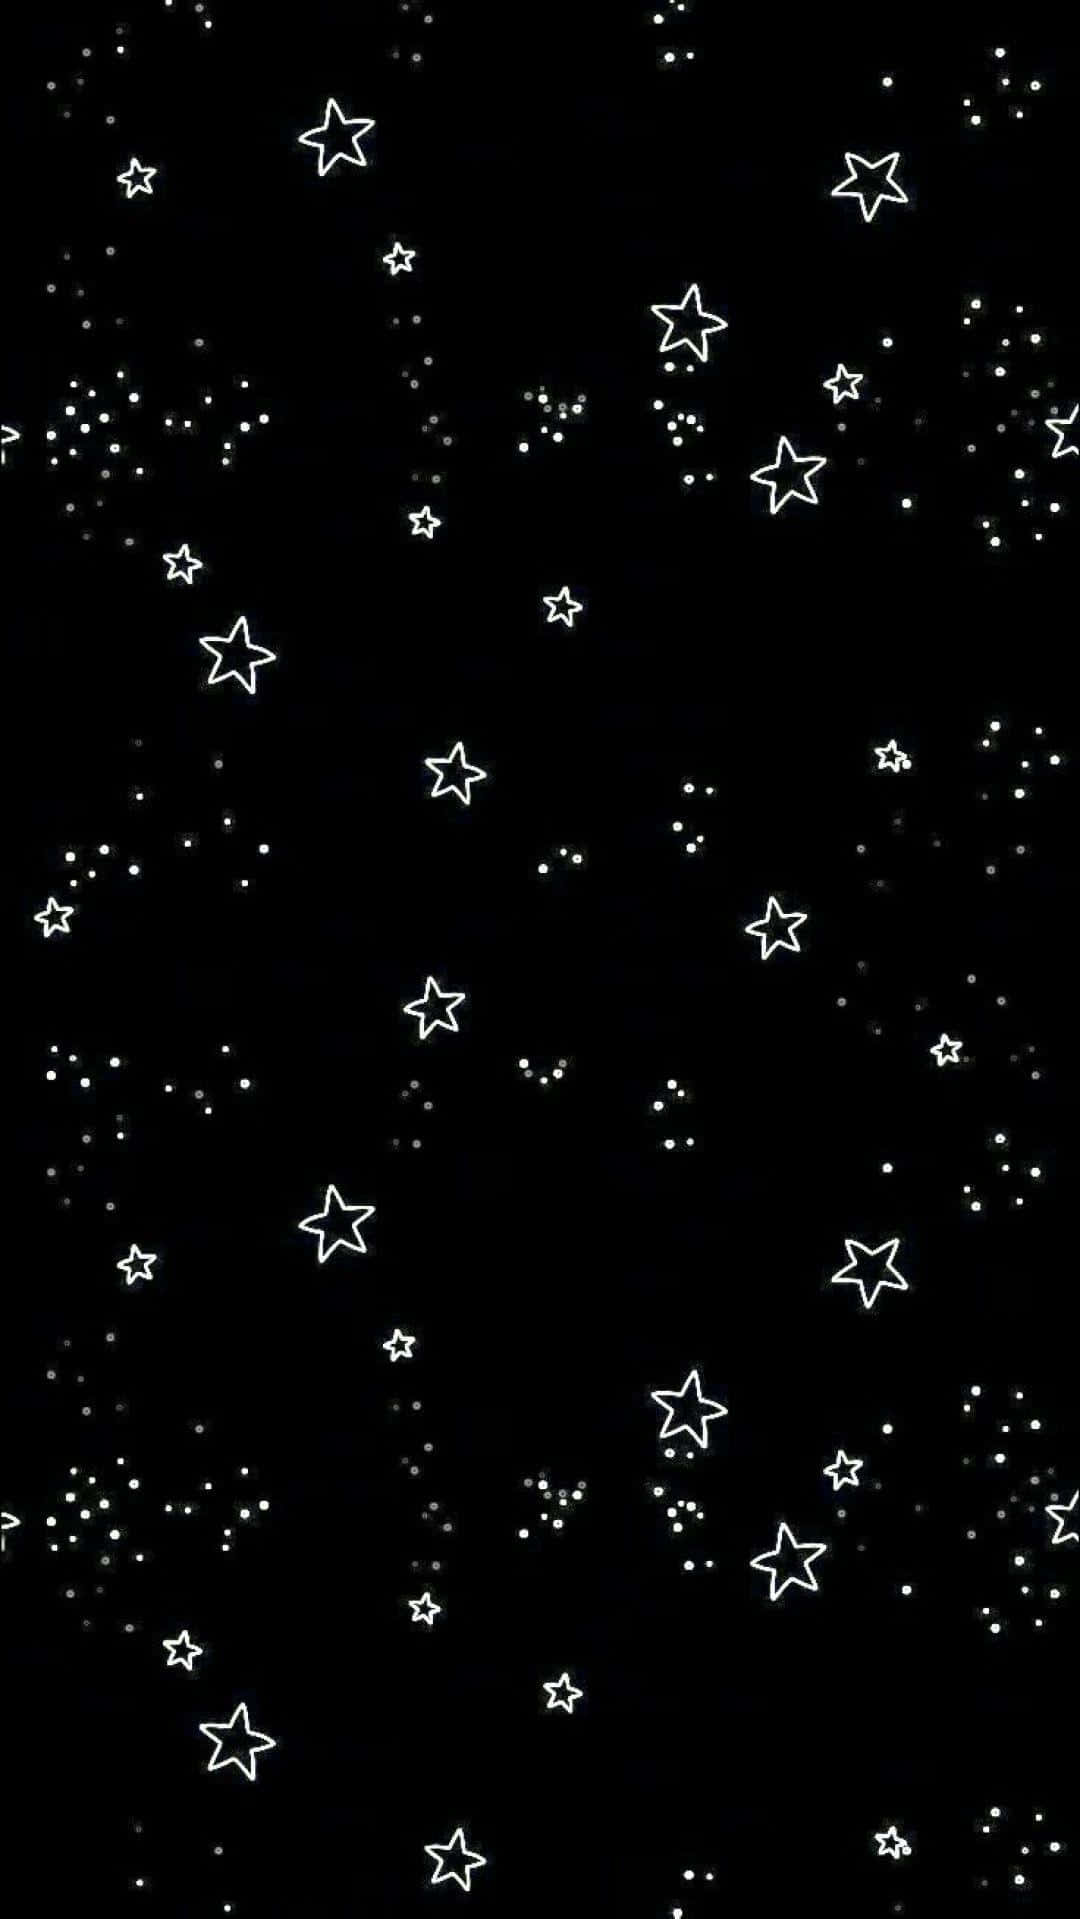 A Black Background With White Stars On It